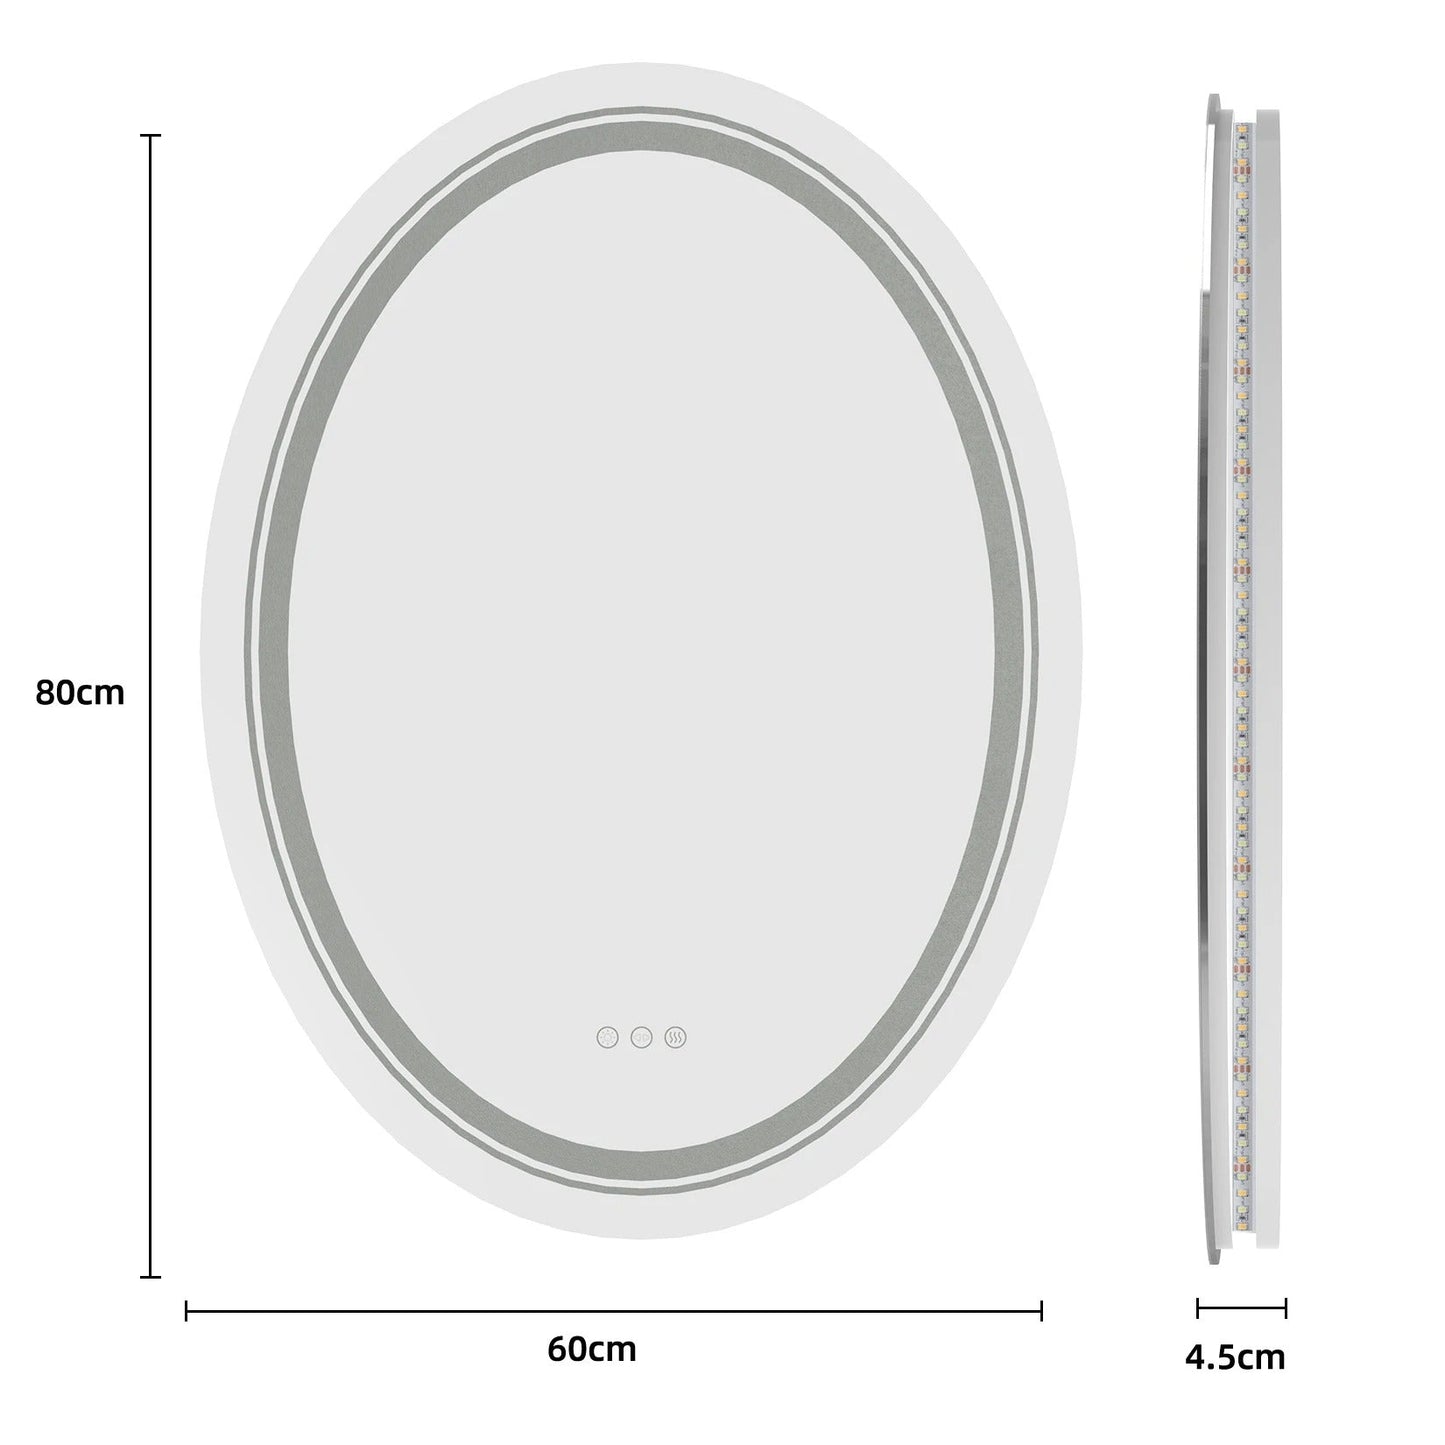 Double Light OVAL LED Illuminated Mirror Bathroom Makeup Mirror with Dimmable